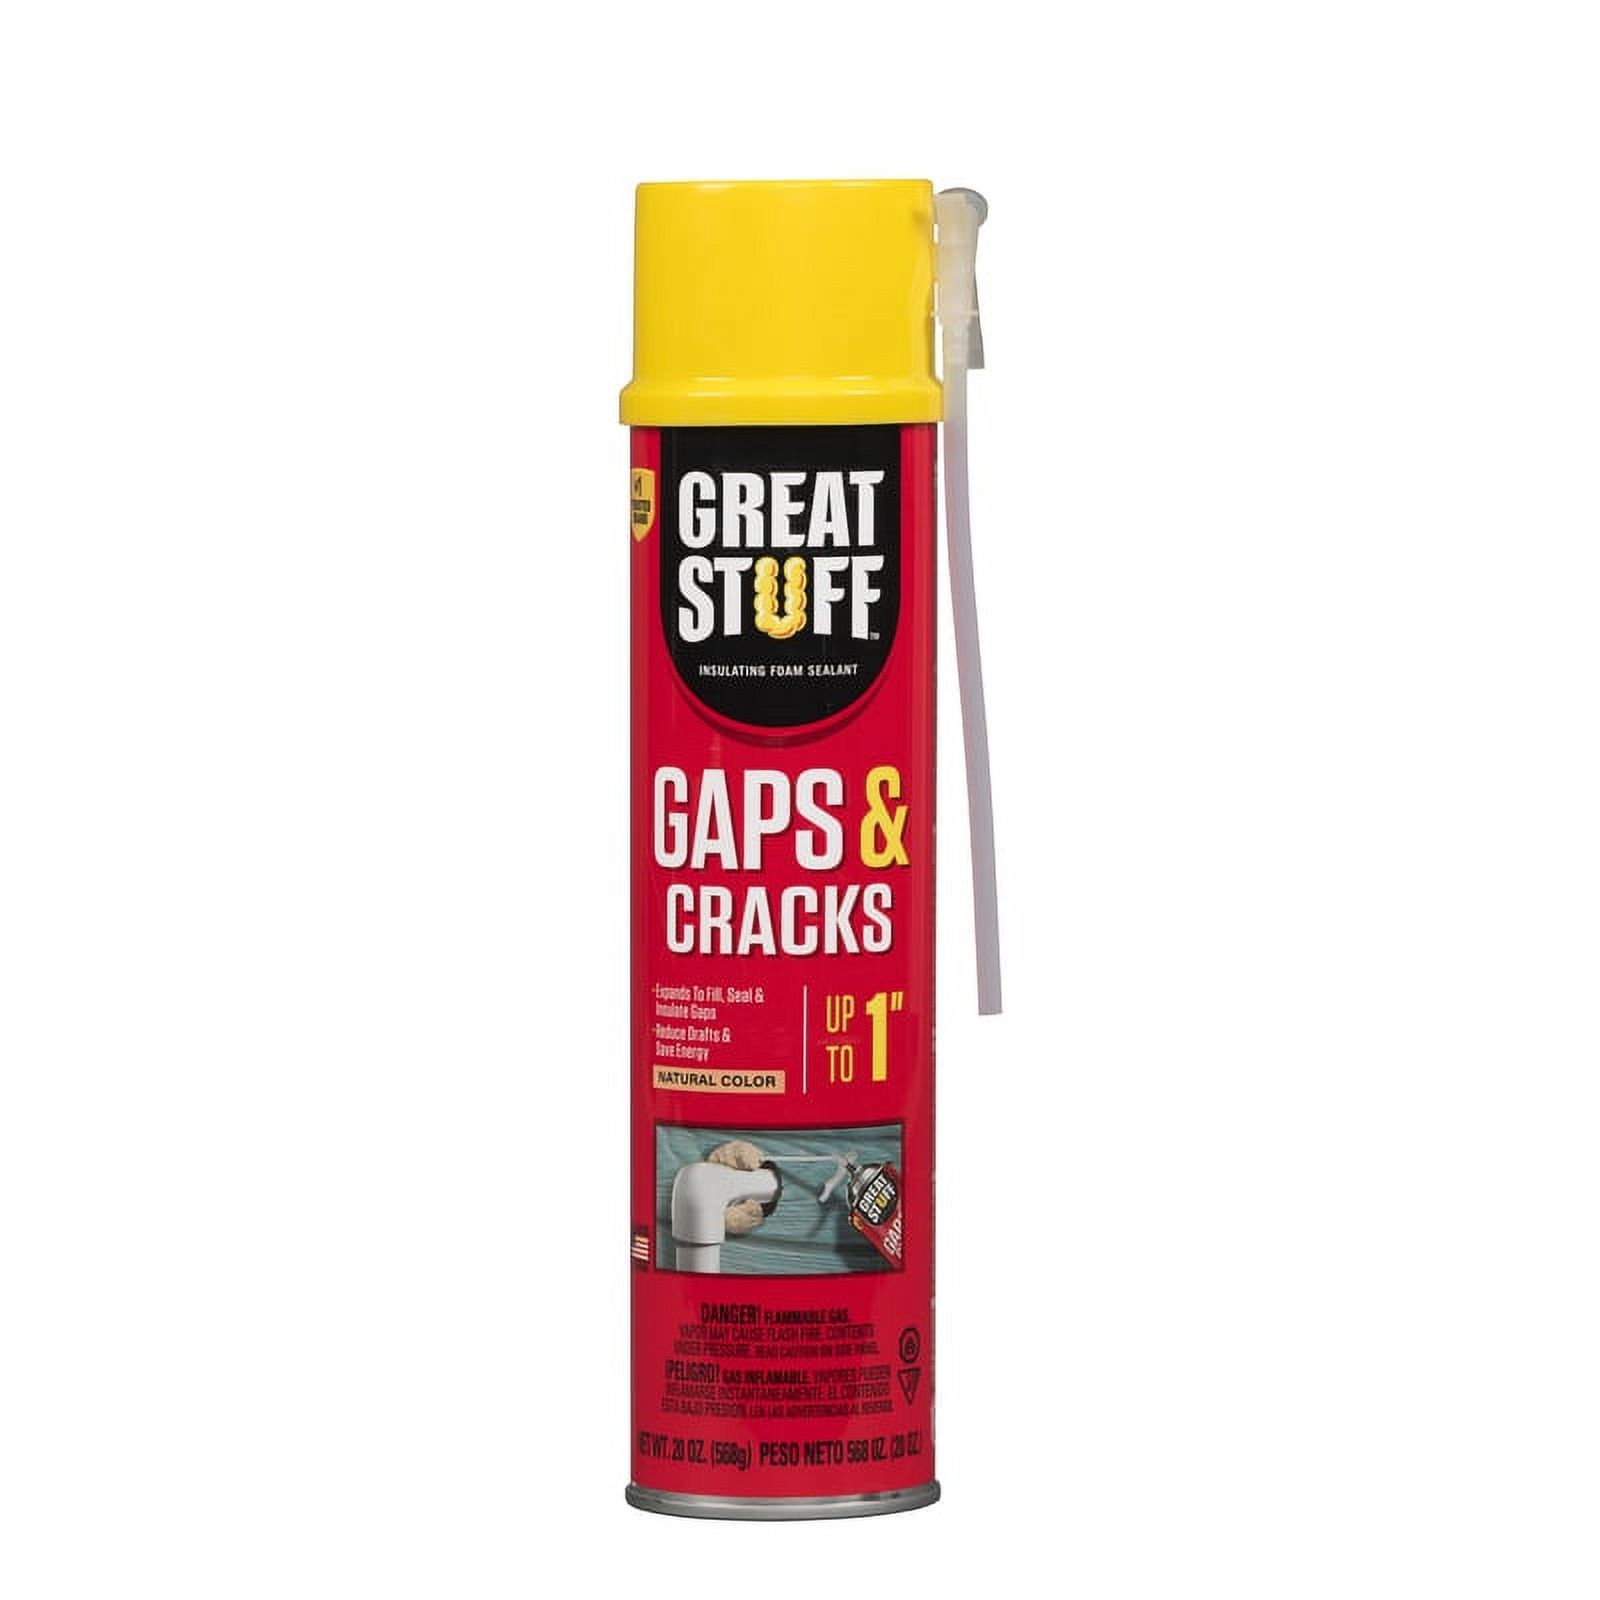 Great Stuff 157911 Insulating Foam Sealant, 20 Ounce, Ivory - image 1 of 8